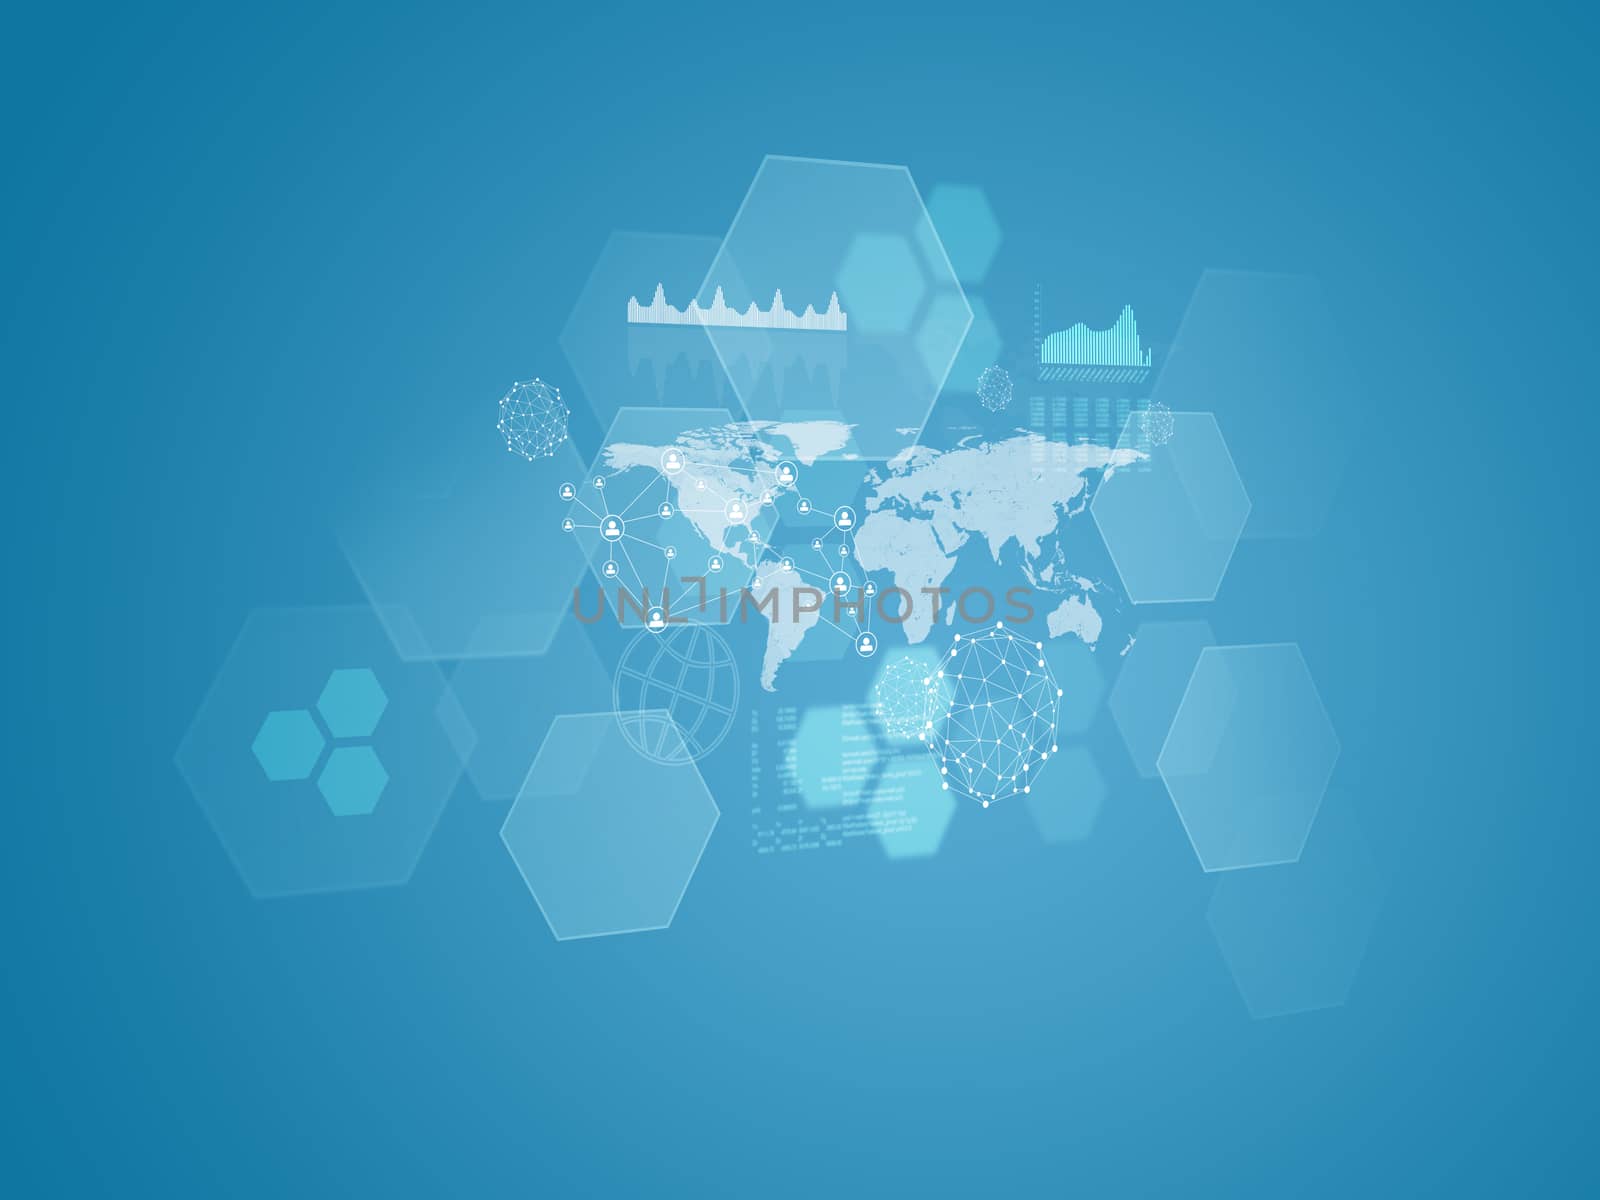 World map, transparent hexagons, graphs and network. Blue background